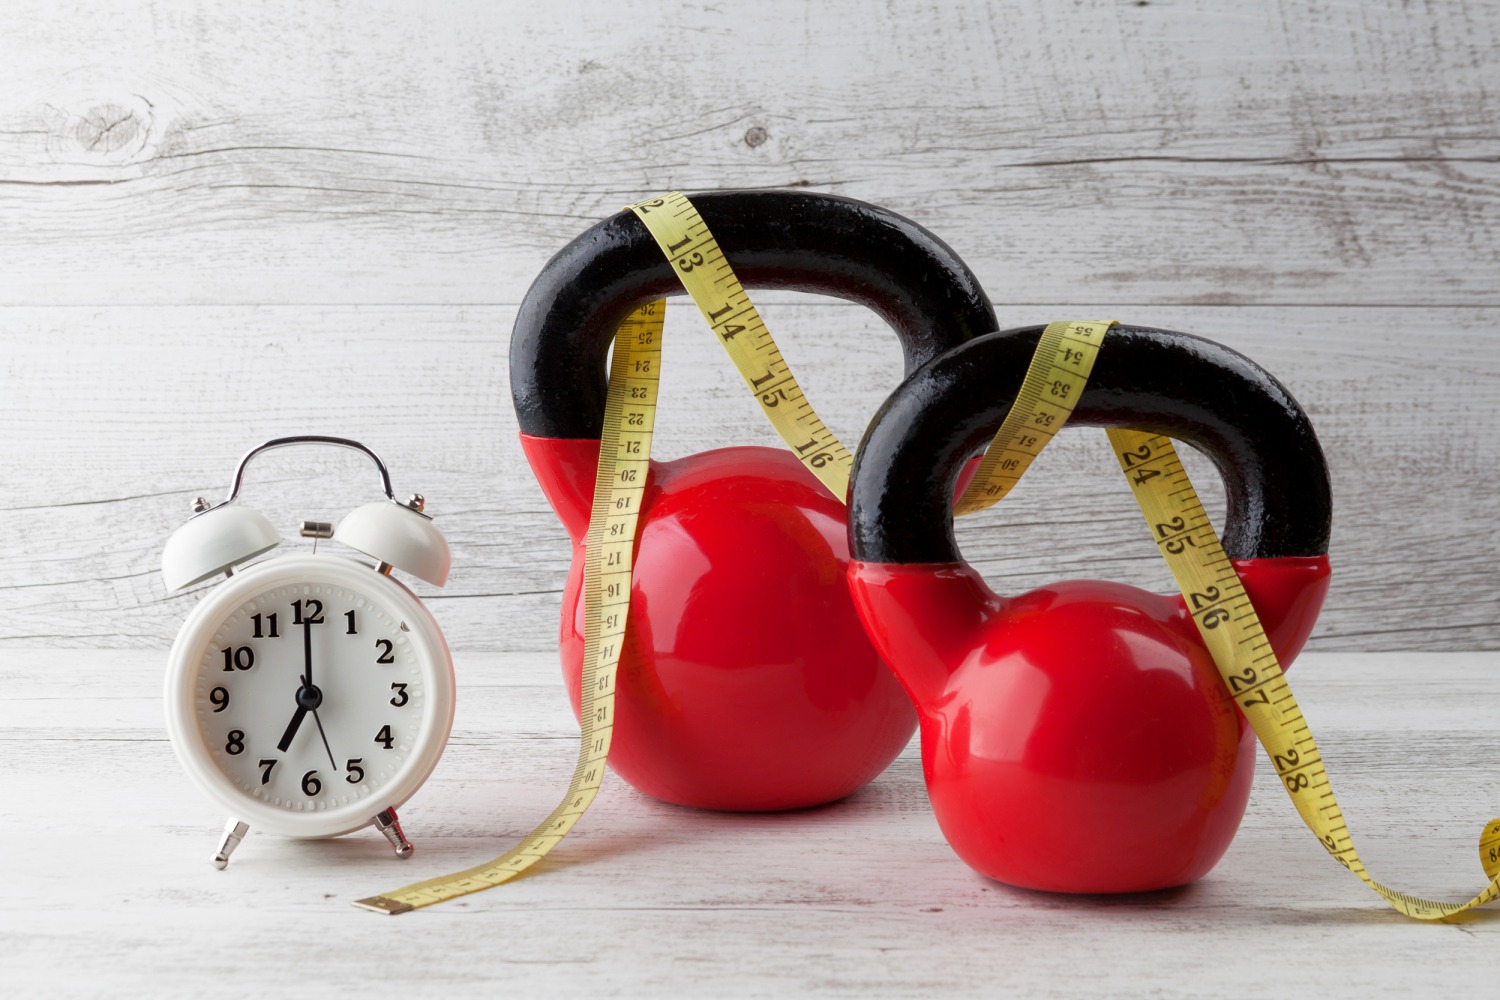 Weight Loss Diet: 7 Signs That Tell You Are Making Progress Other Than The  Weighing Scale